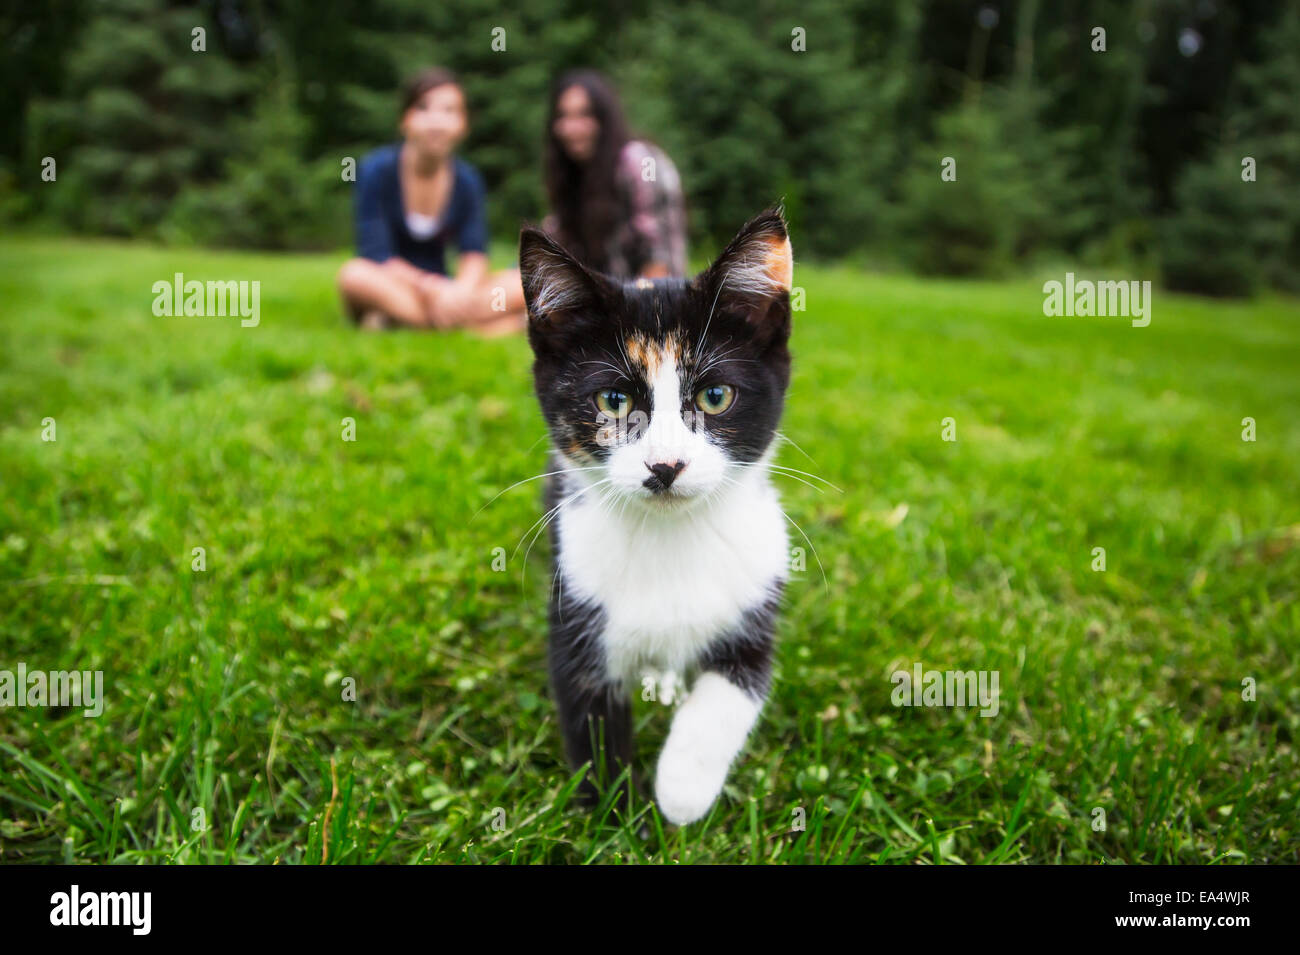 Calico kitten coming towards camera on the grass with two girls sitting in the background; Sherwood Park, Alberta, Canada Stock Photo